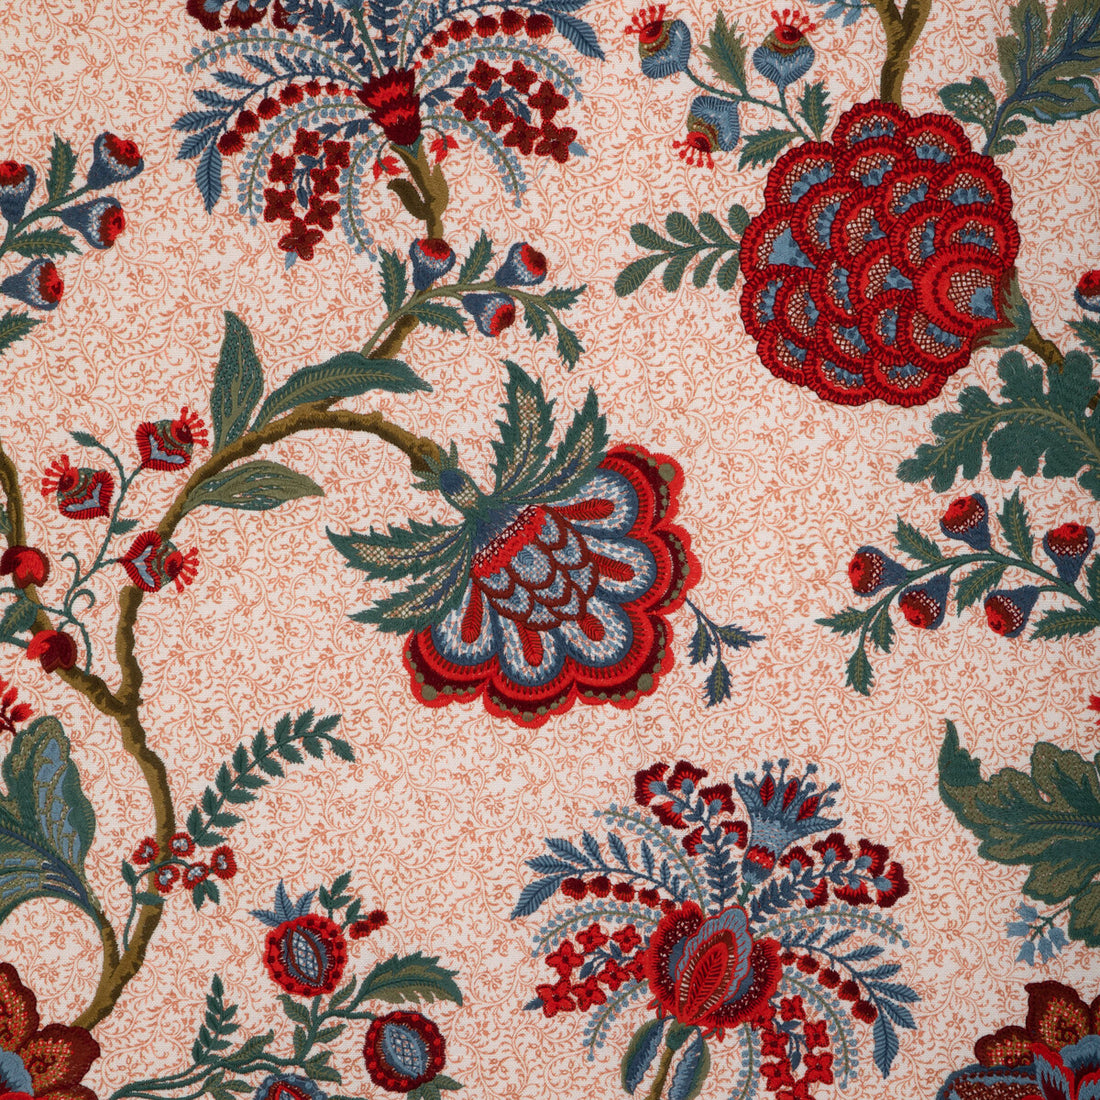 Anduze Emb fabric in red/blue color - pattern 8023118.195.0 - by Brunschwig &amp; Fils in the Anduze Embroideries collection